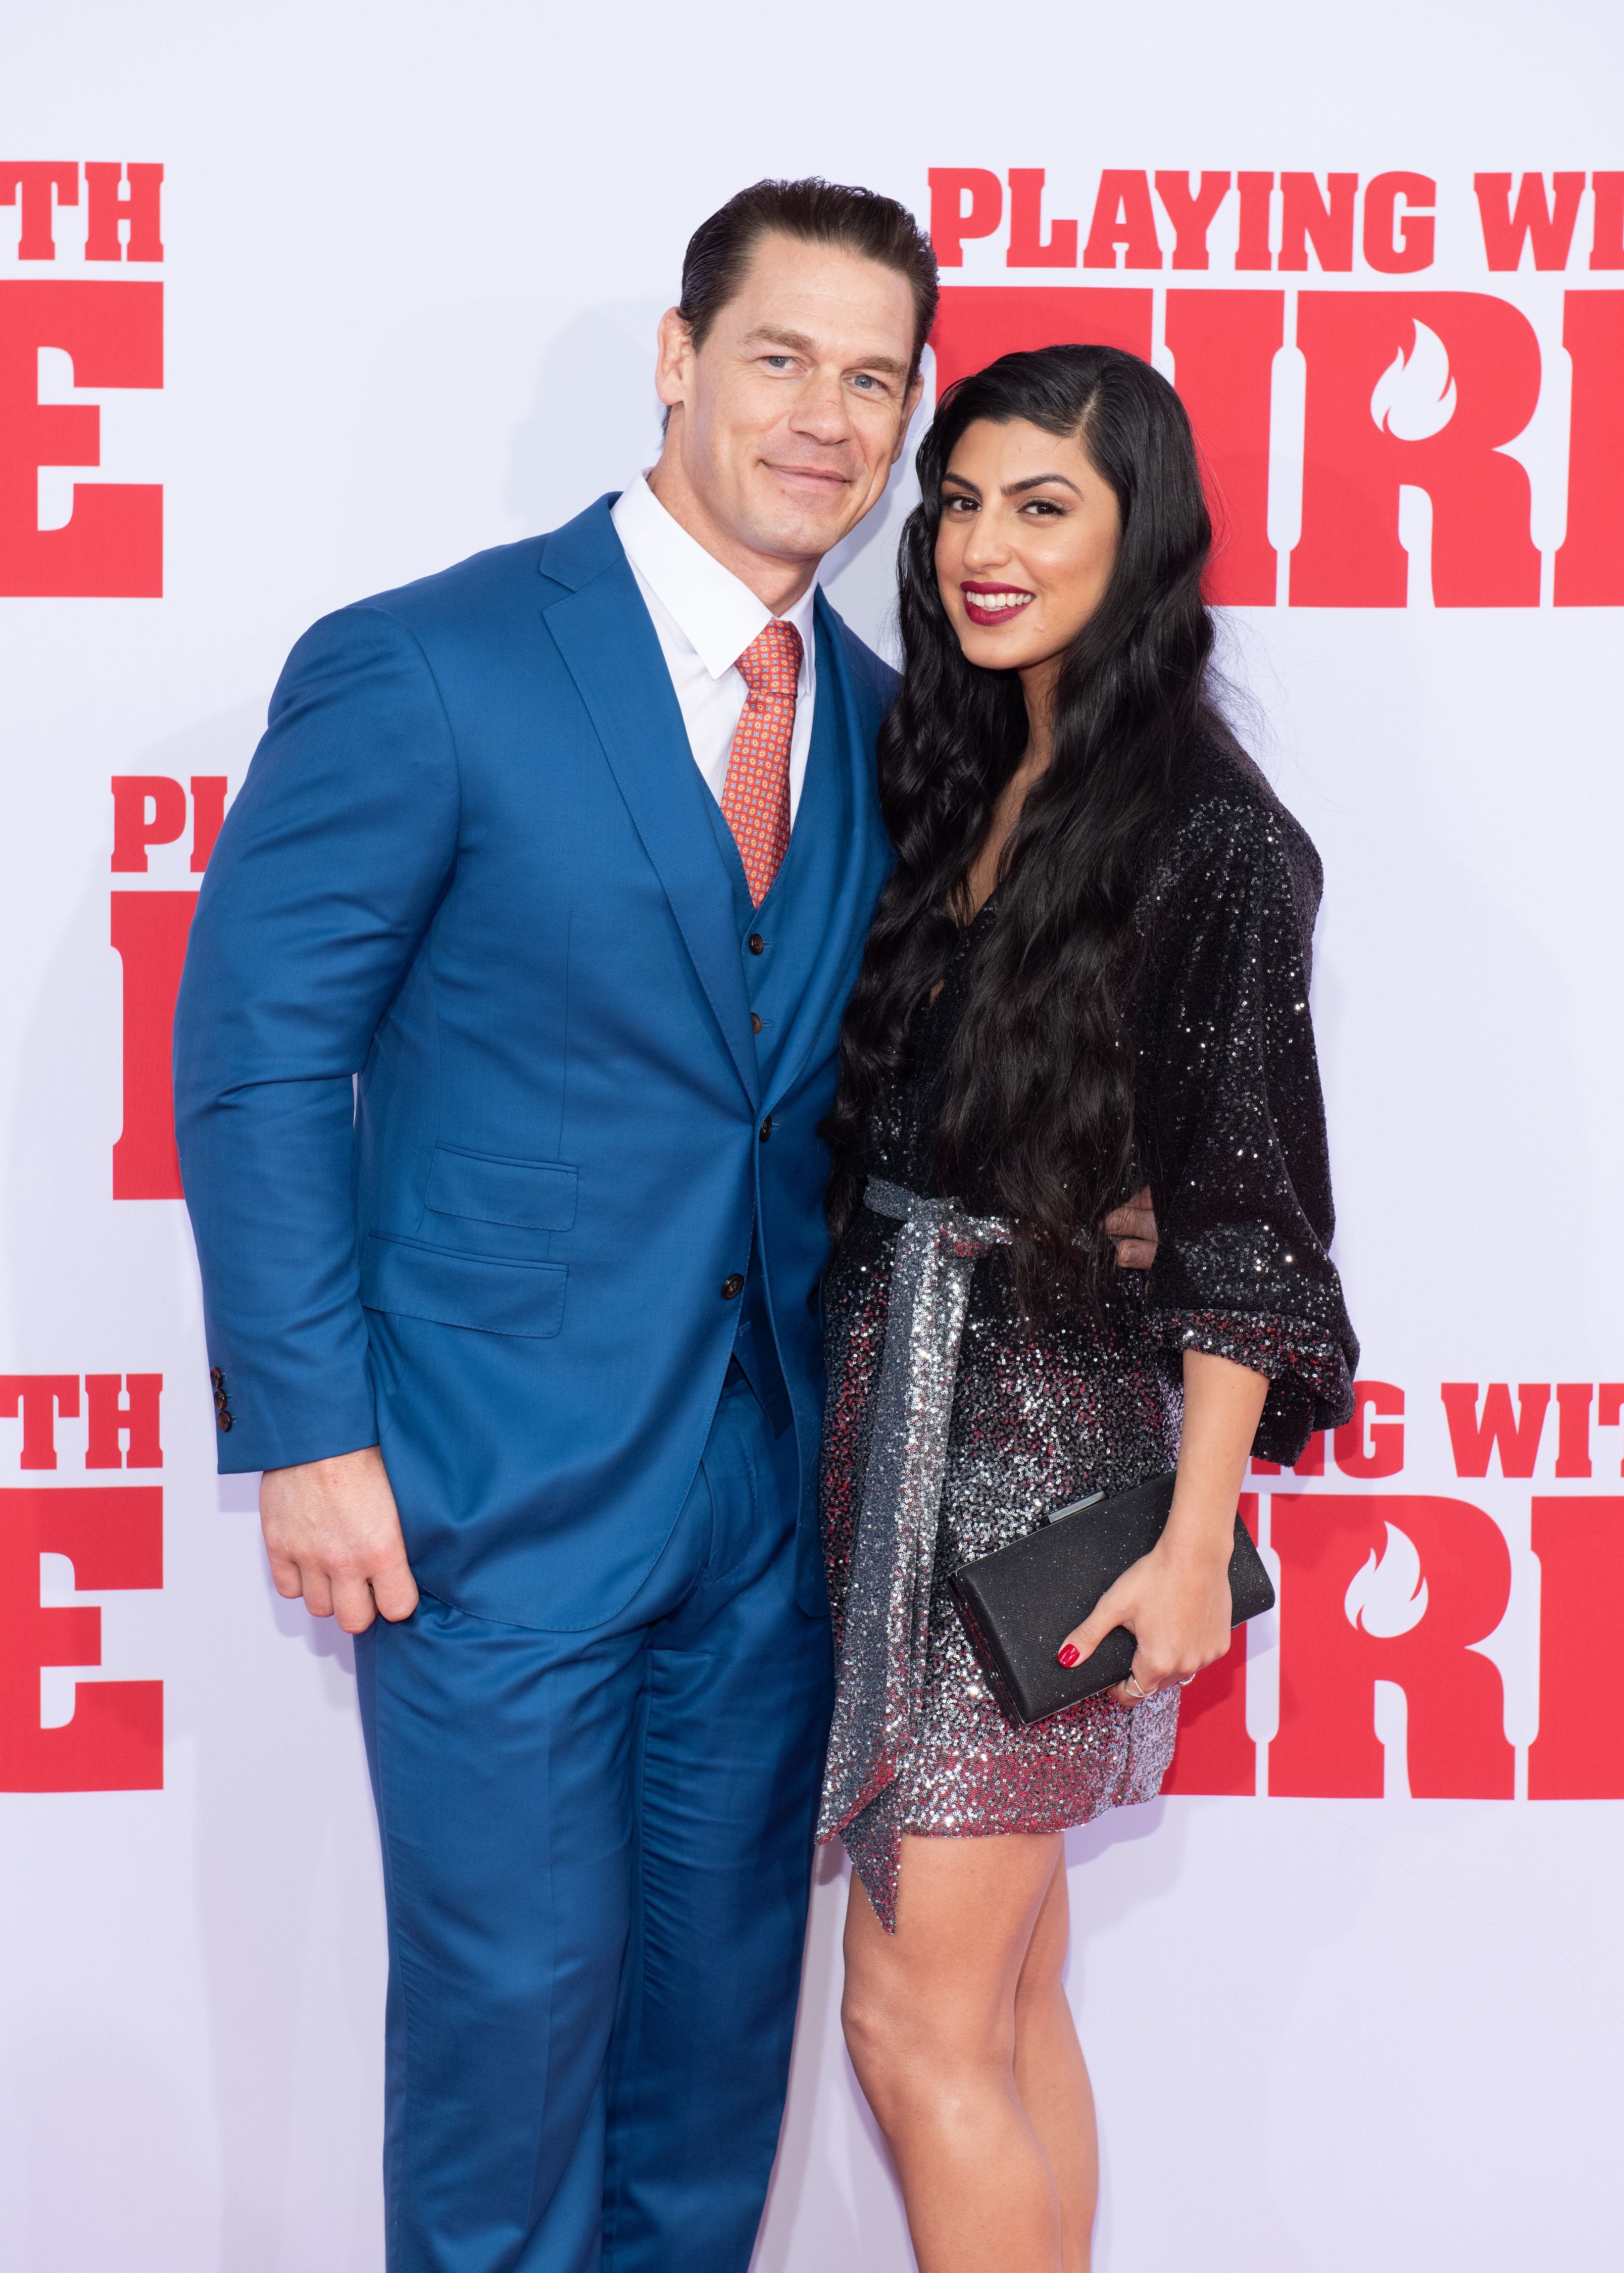 John Cena and Shay Shariatzadeh at the "Playing With Fire" New York premiere at AMC Lincoln Square Theater on October 26, 2019 | Photo: Noam Galai/Getty Images